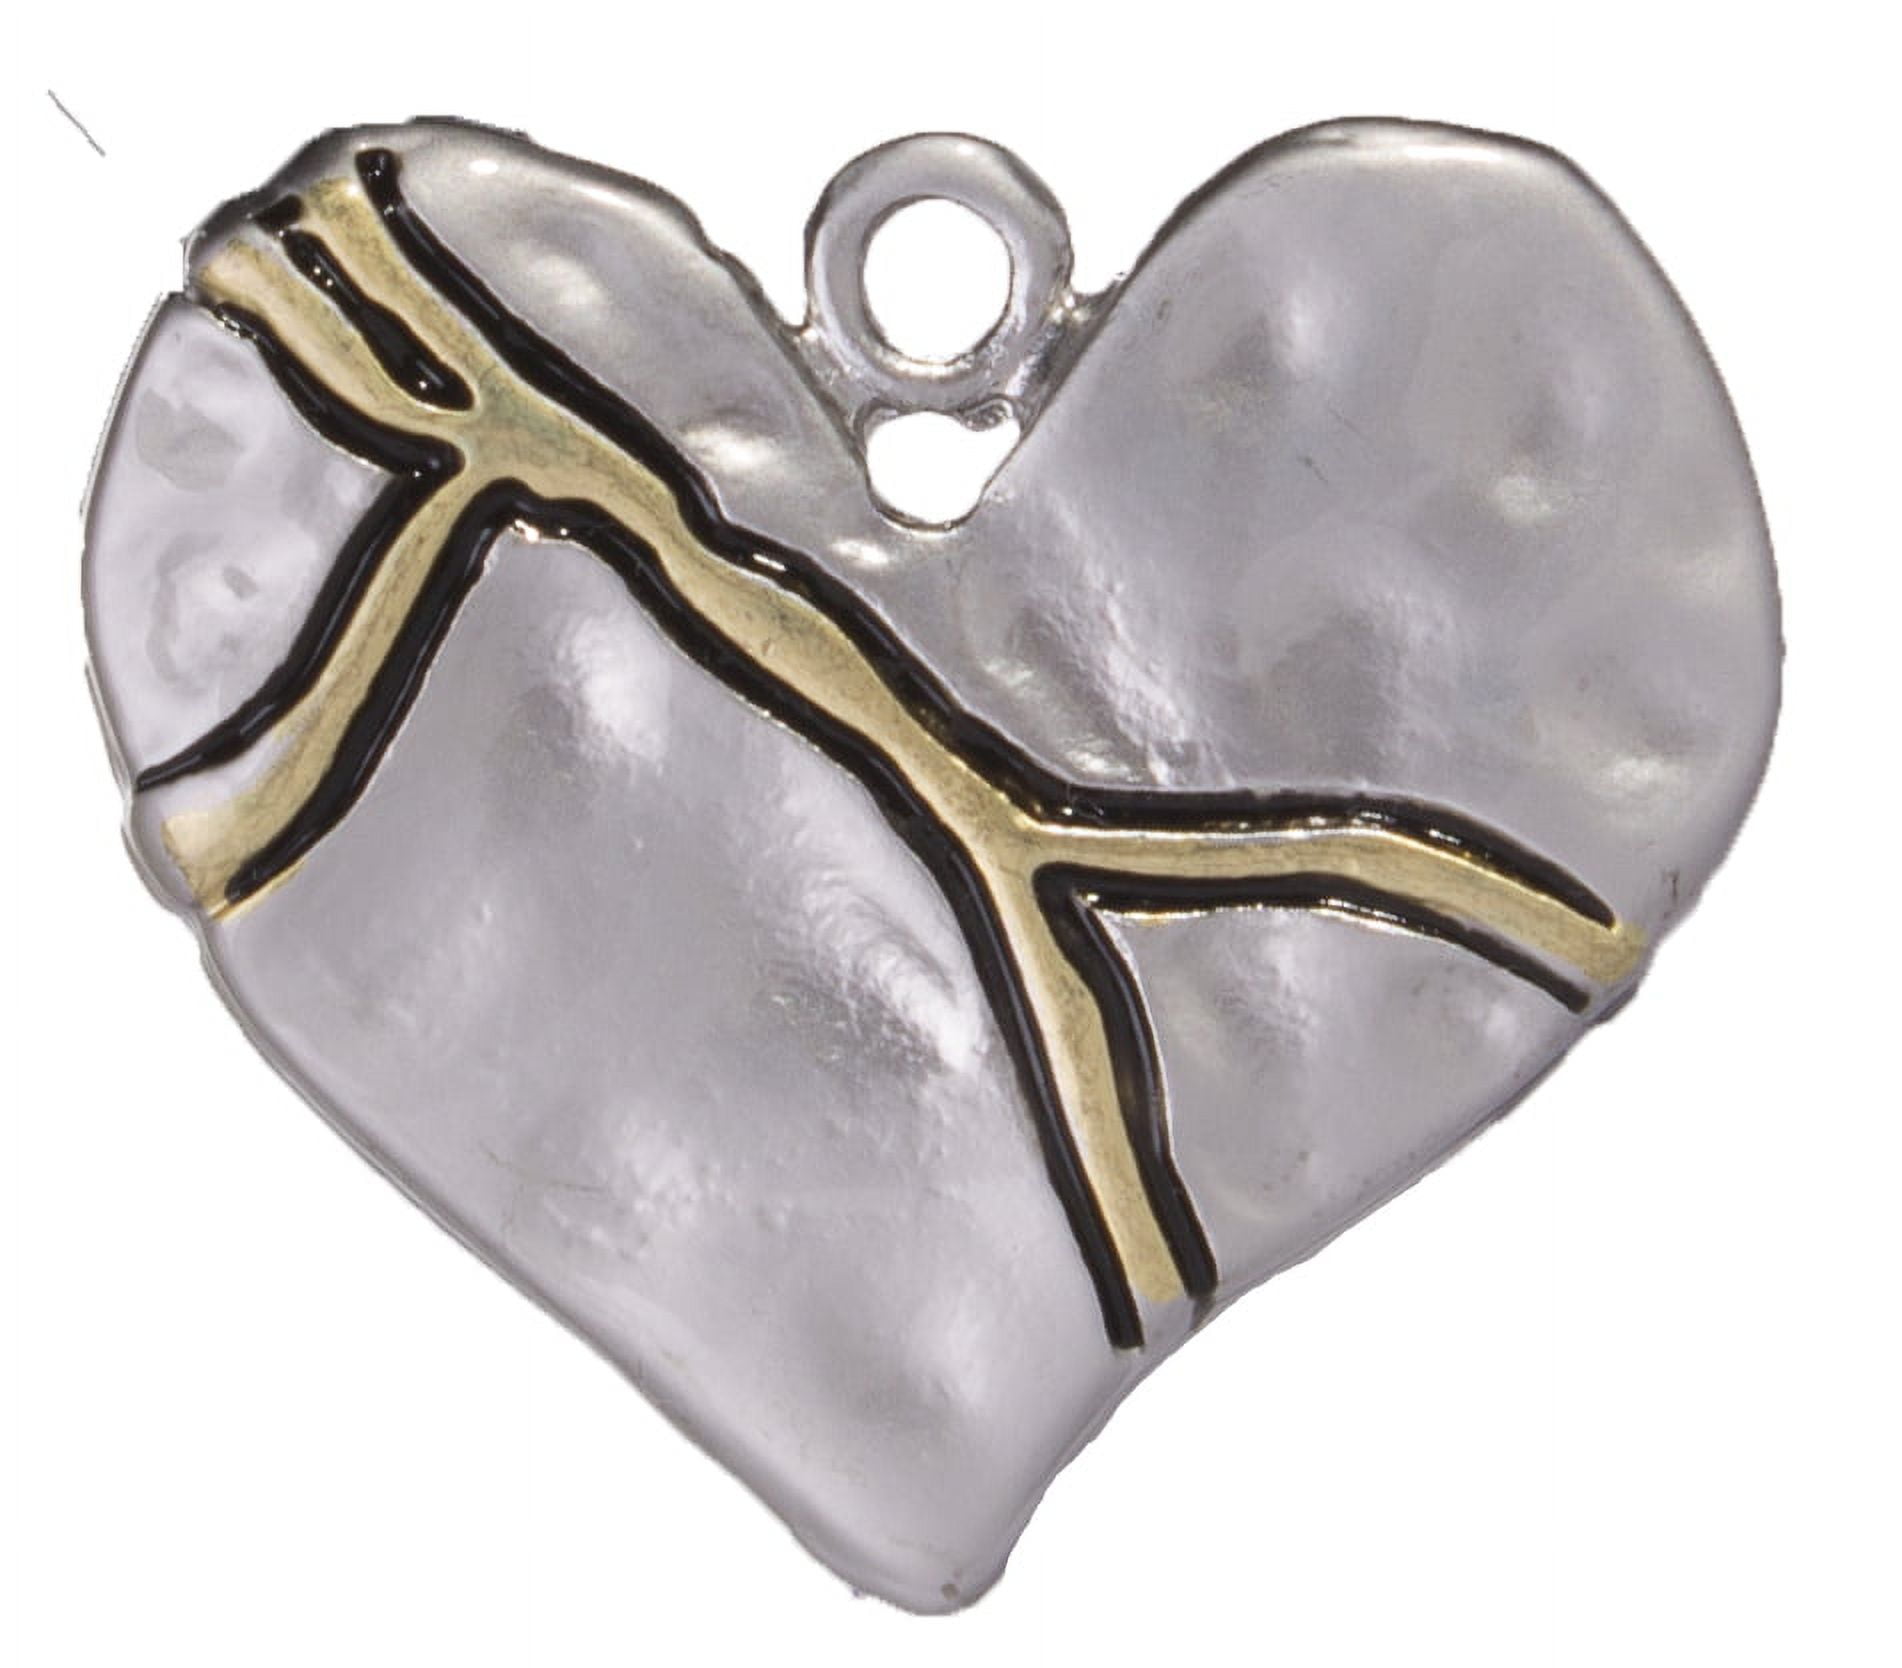 14k Gold Filled Broken Heart Charm Dripping Blood Red Black White Enamel  Love for Valentine Jewelry Making N-347 - N-349